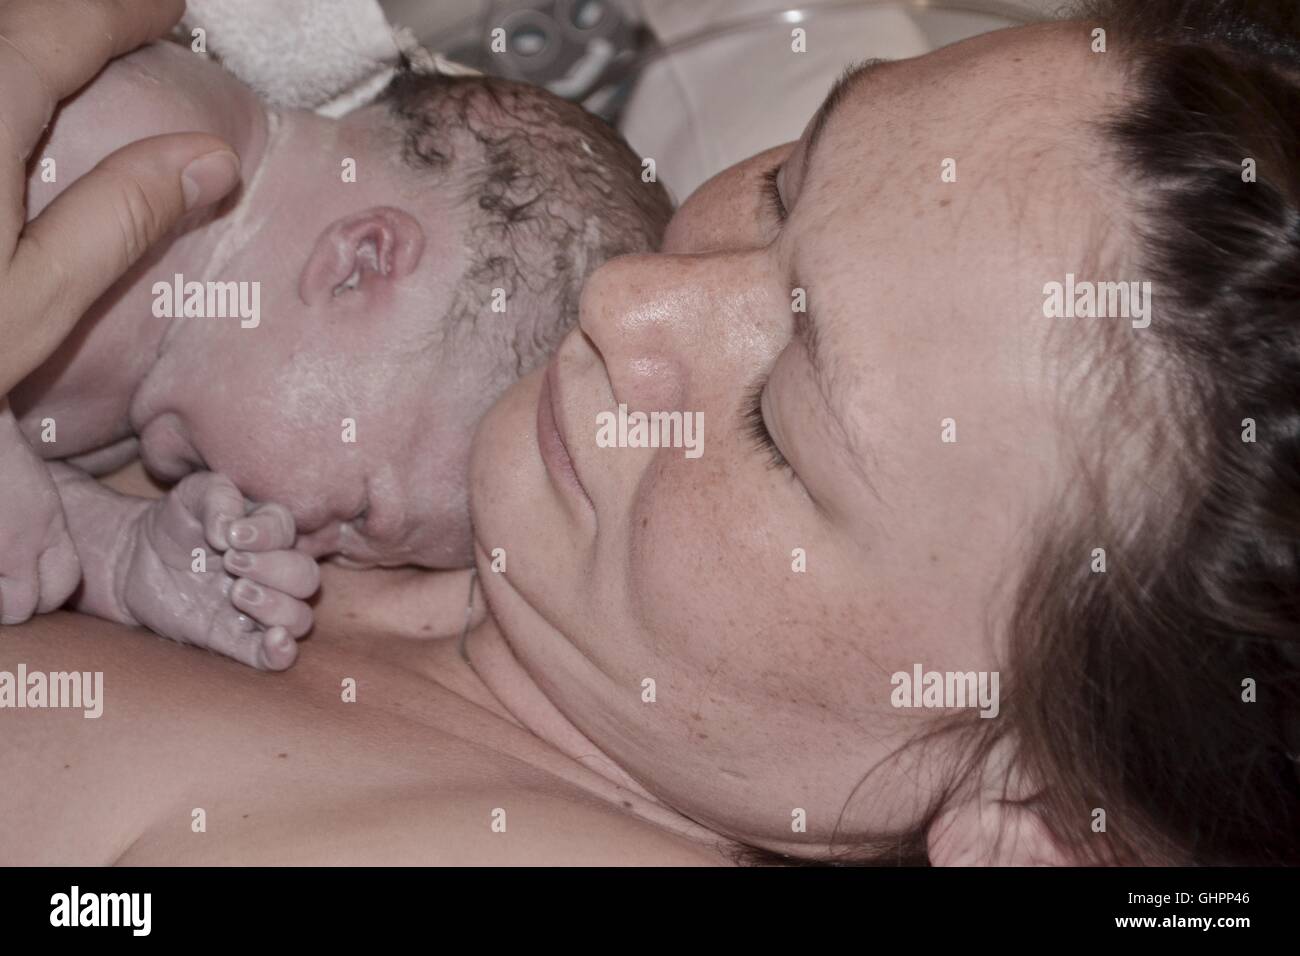 new baby and mom in hospital Stock Photo